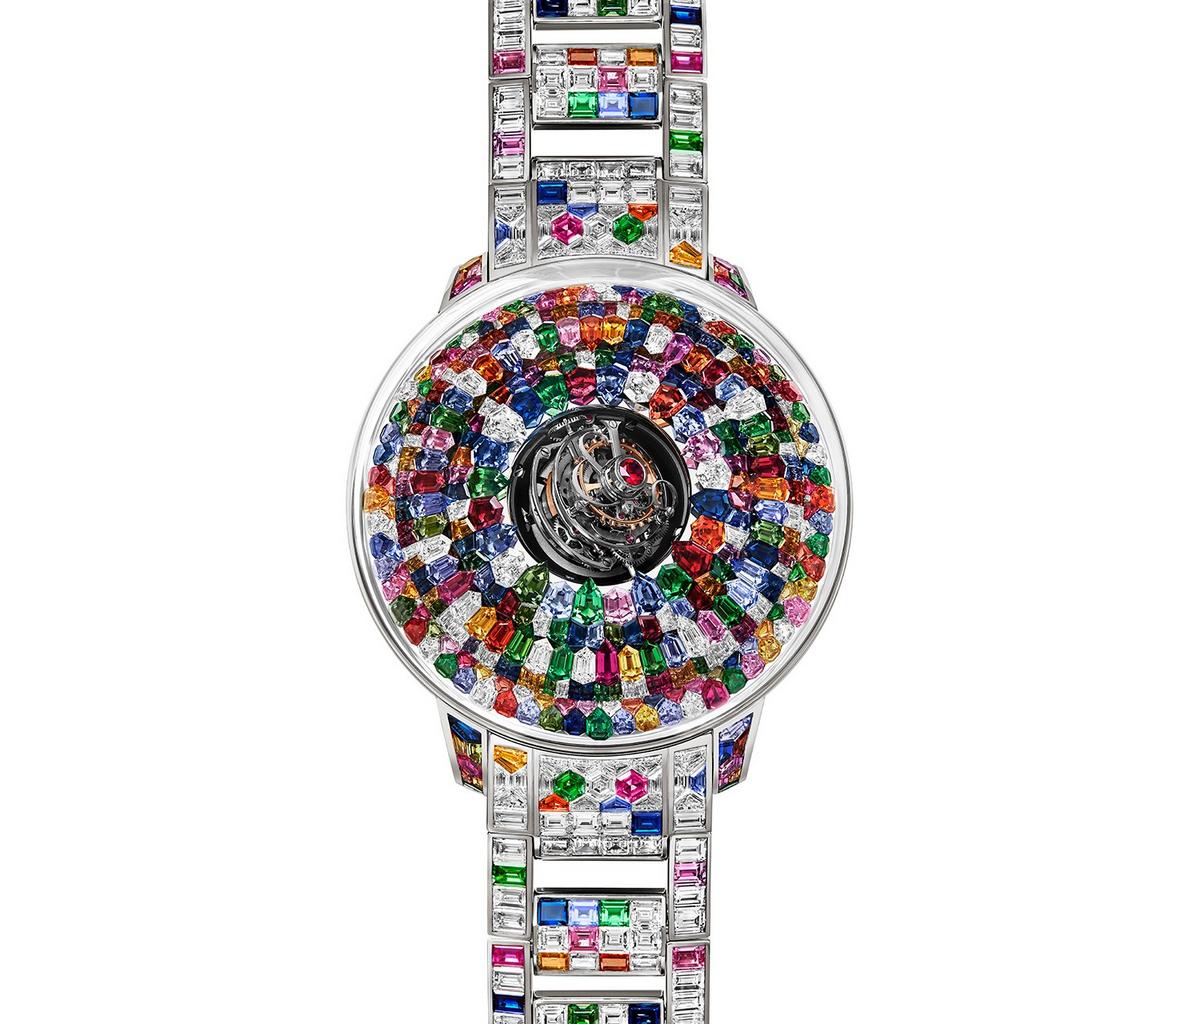 This $1.8 million Jacob & Co timepiece is studded with a staggering 1000 gemstones and they make it nearly impossible to tell the time